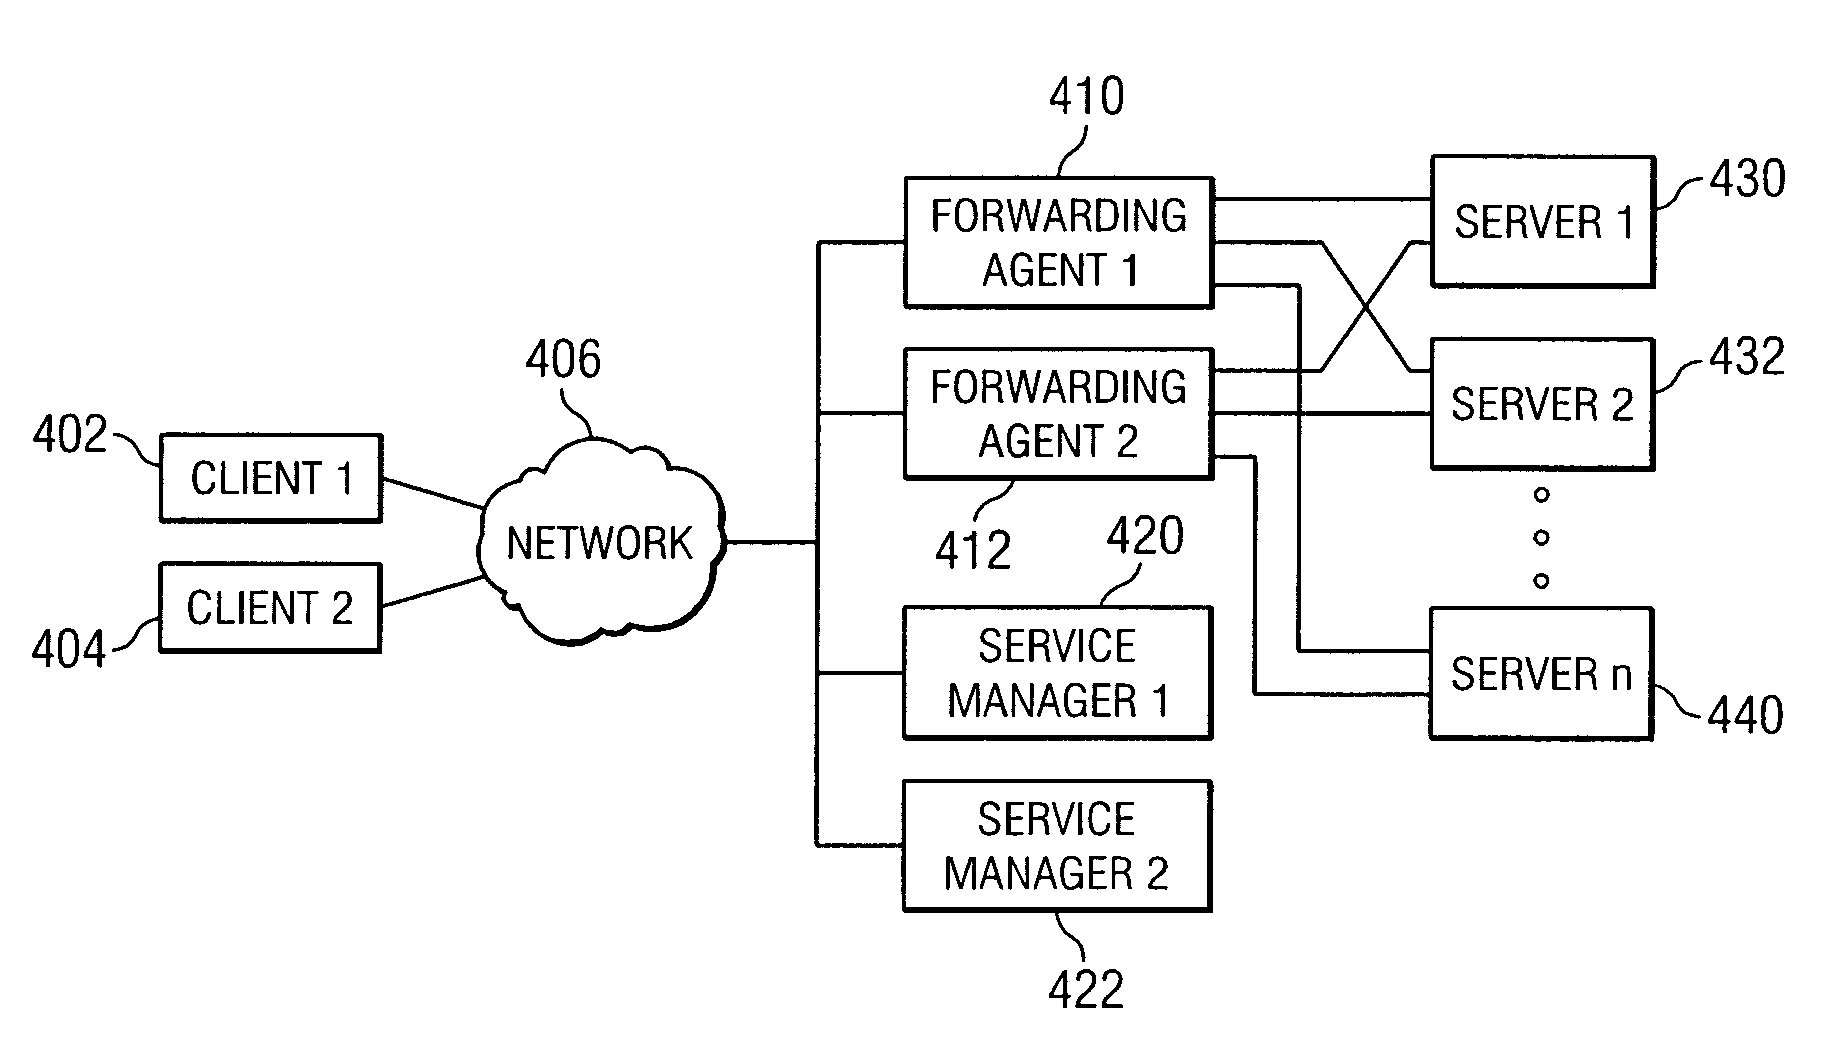 Load balancing using distributed forwarding agents with application based feedback for different virtual machines